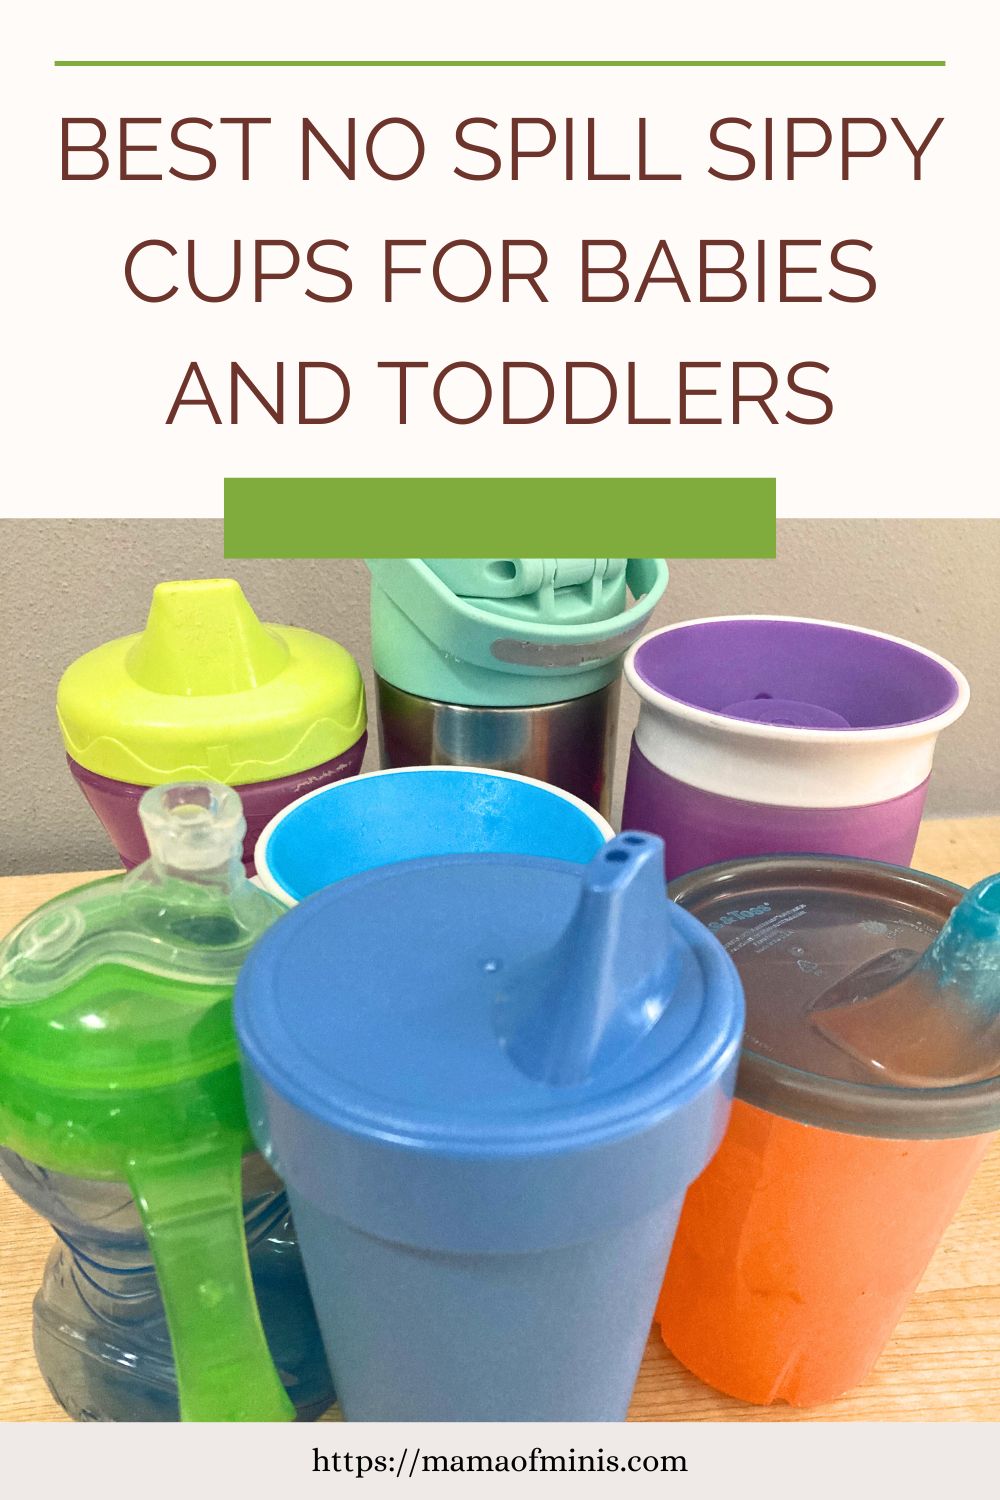 Best No Spill Sippy Cups for Babies and Toddlers